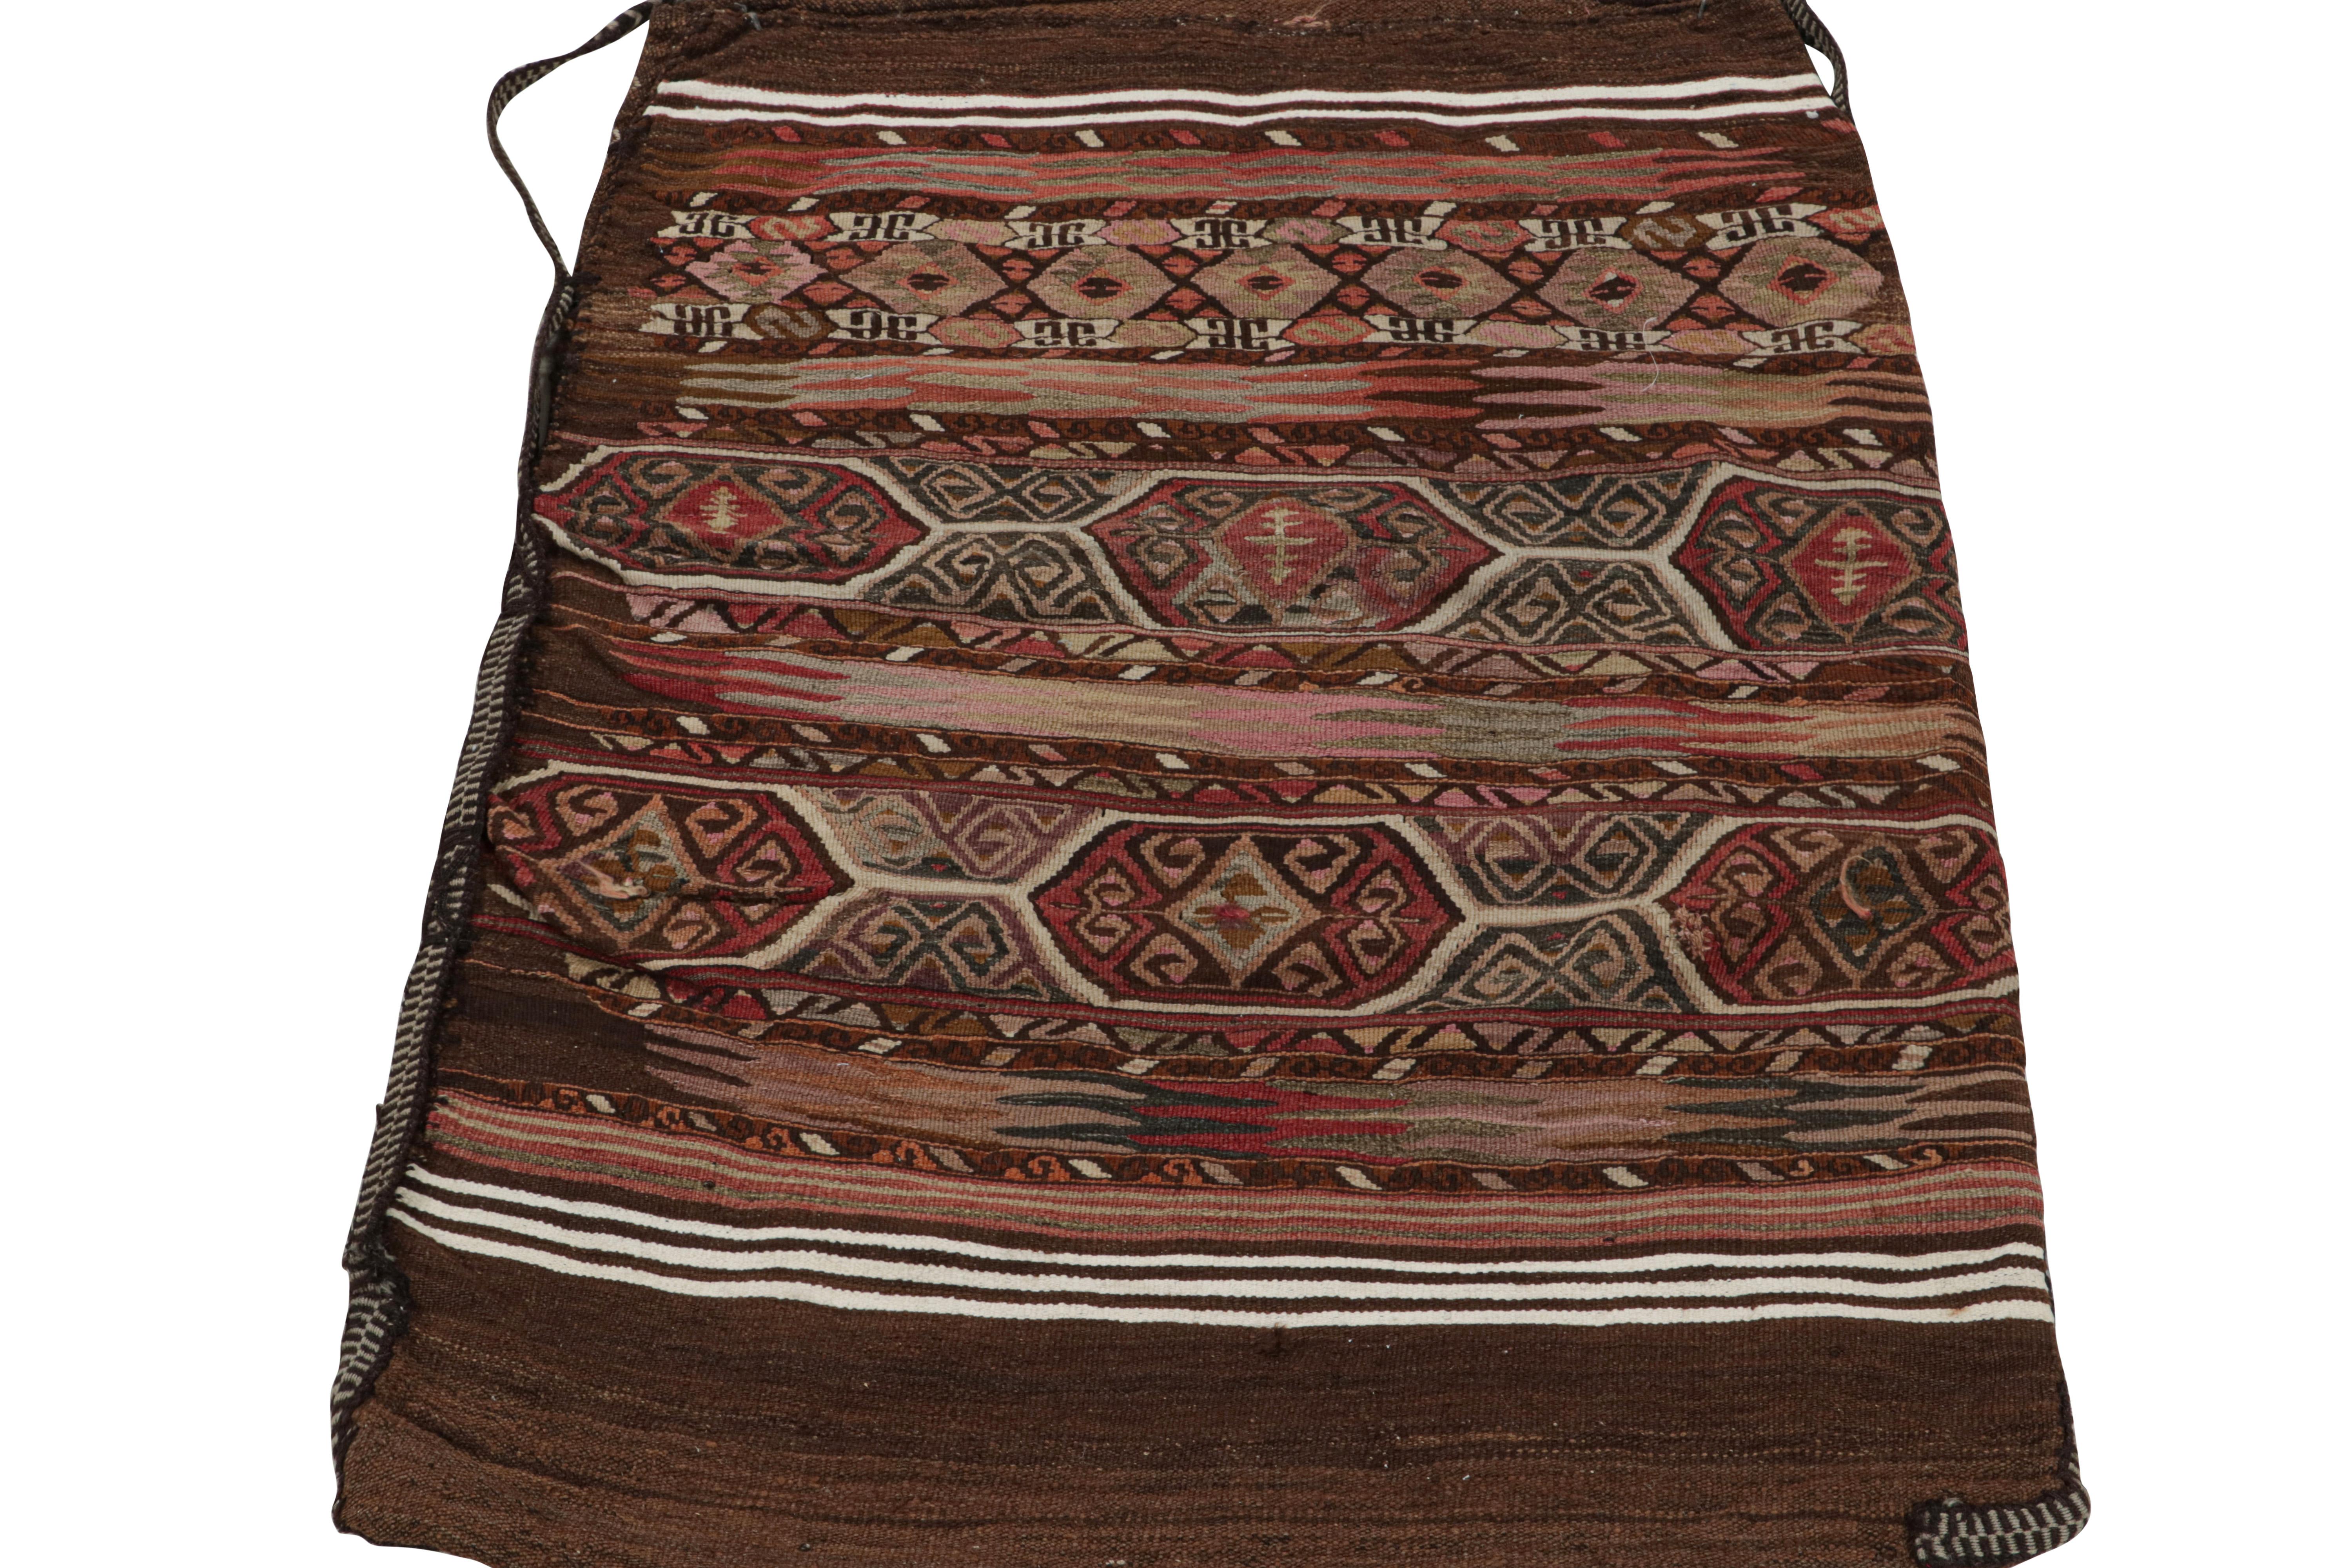 Hand-Woven Antique Persian Tribal bag and Textile with Geometric Patterns, from Rug & Kilim For Sale